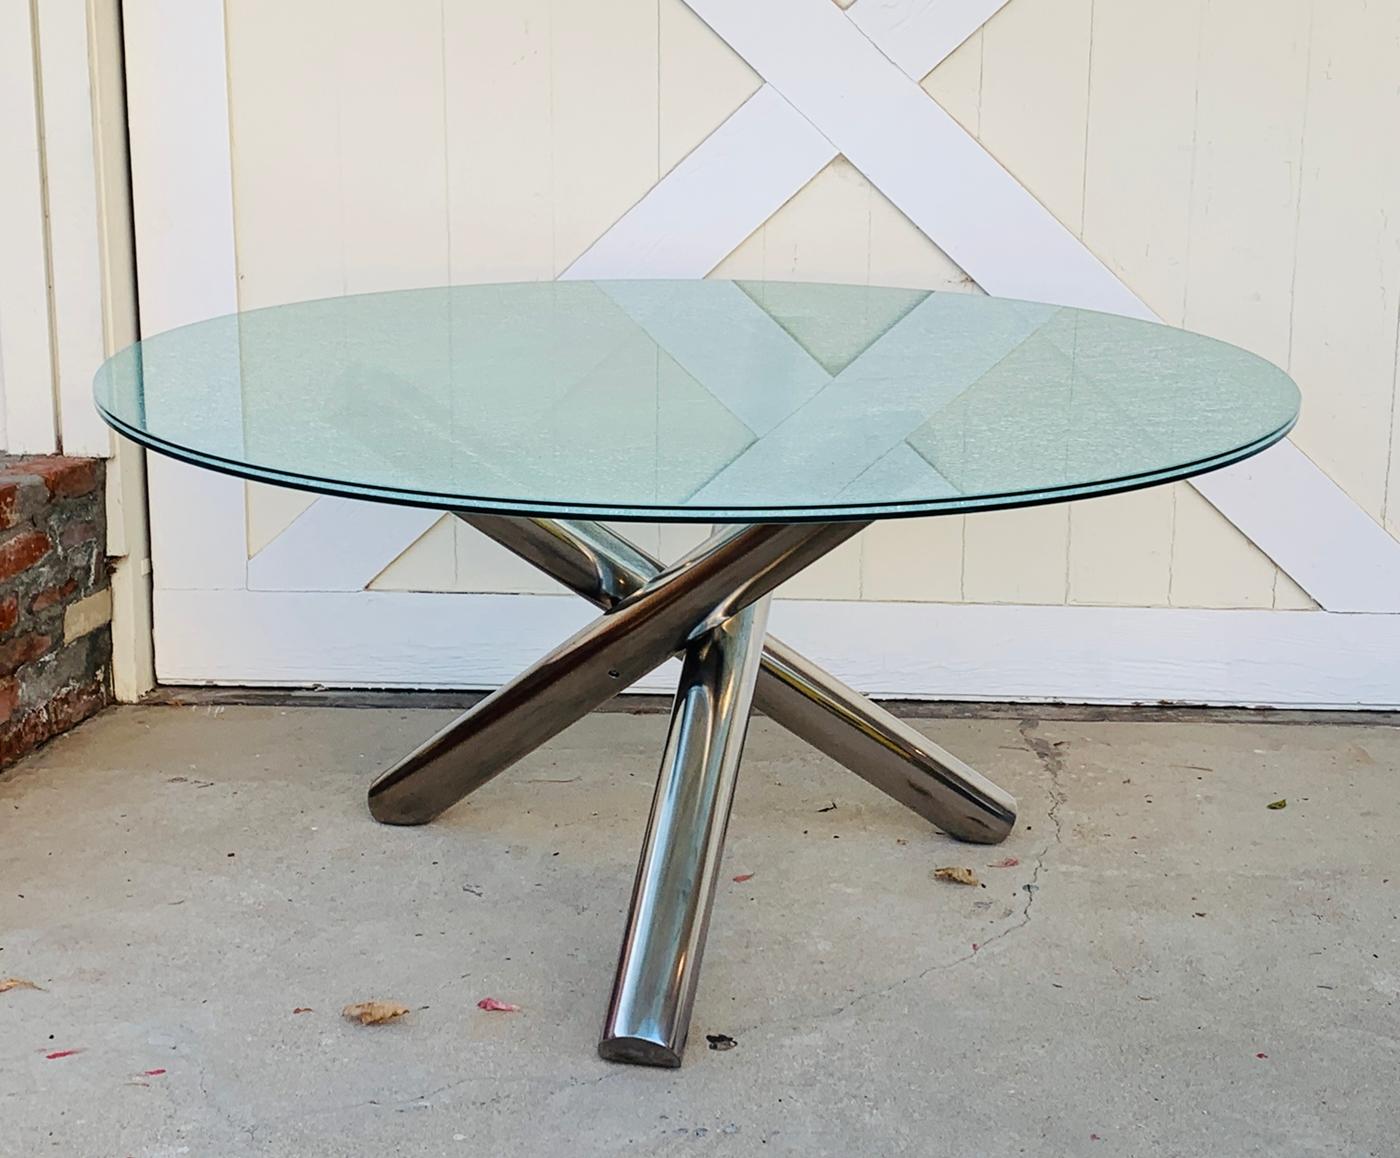 Three intertwined stainless steel posts are fused together, forming the beautiful look of the this tripod Dining Table. A truly futuristic modern looking design. The table comes with a 48 inch crackled glass top creating the finished look that's